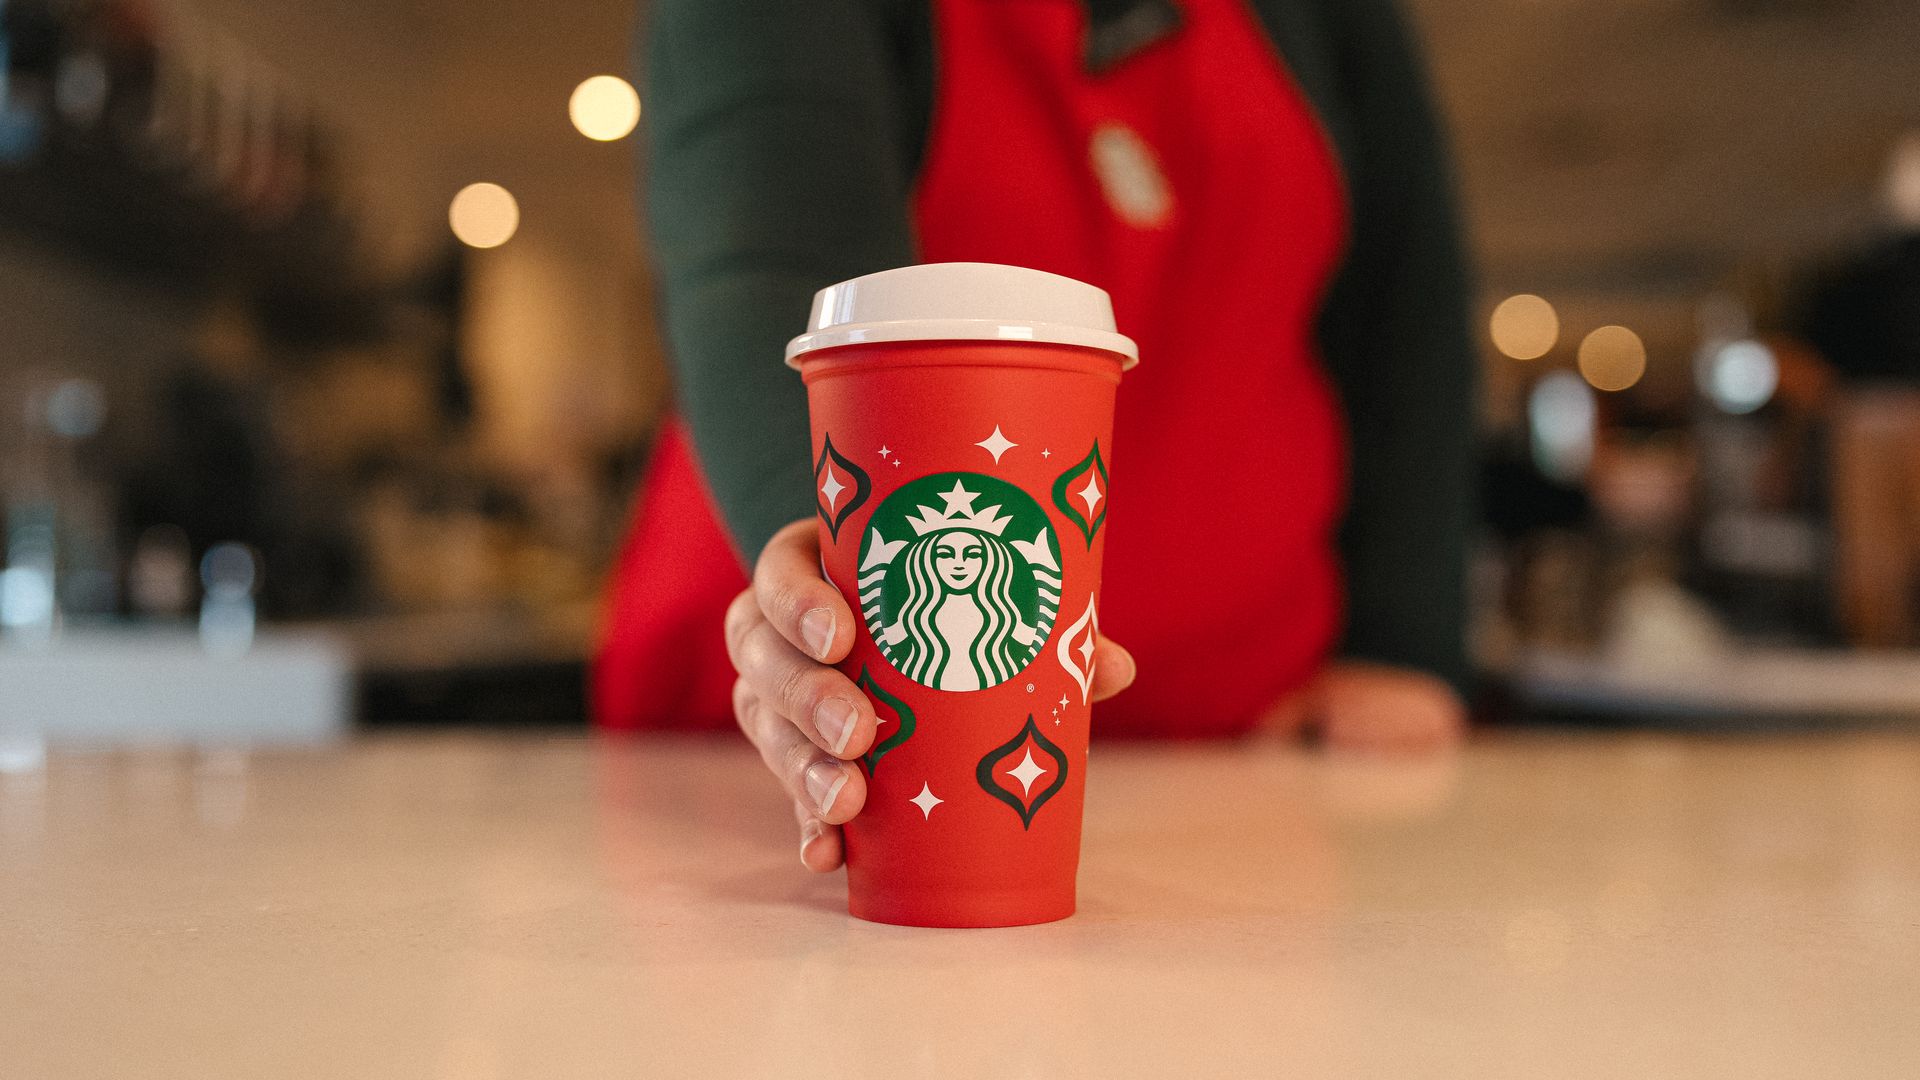 After last year's drama, Starbucks unveils holiday cups designed